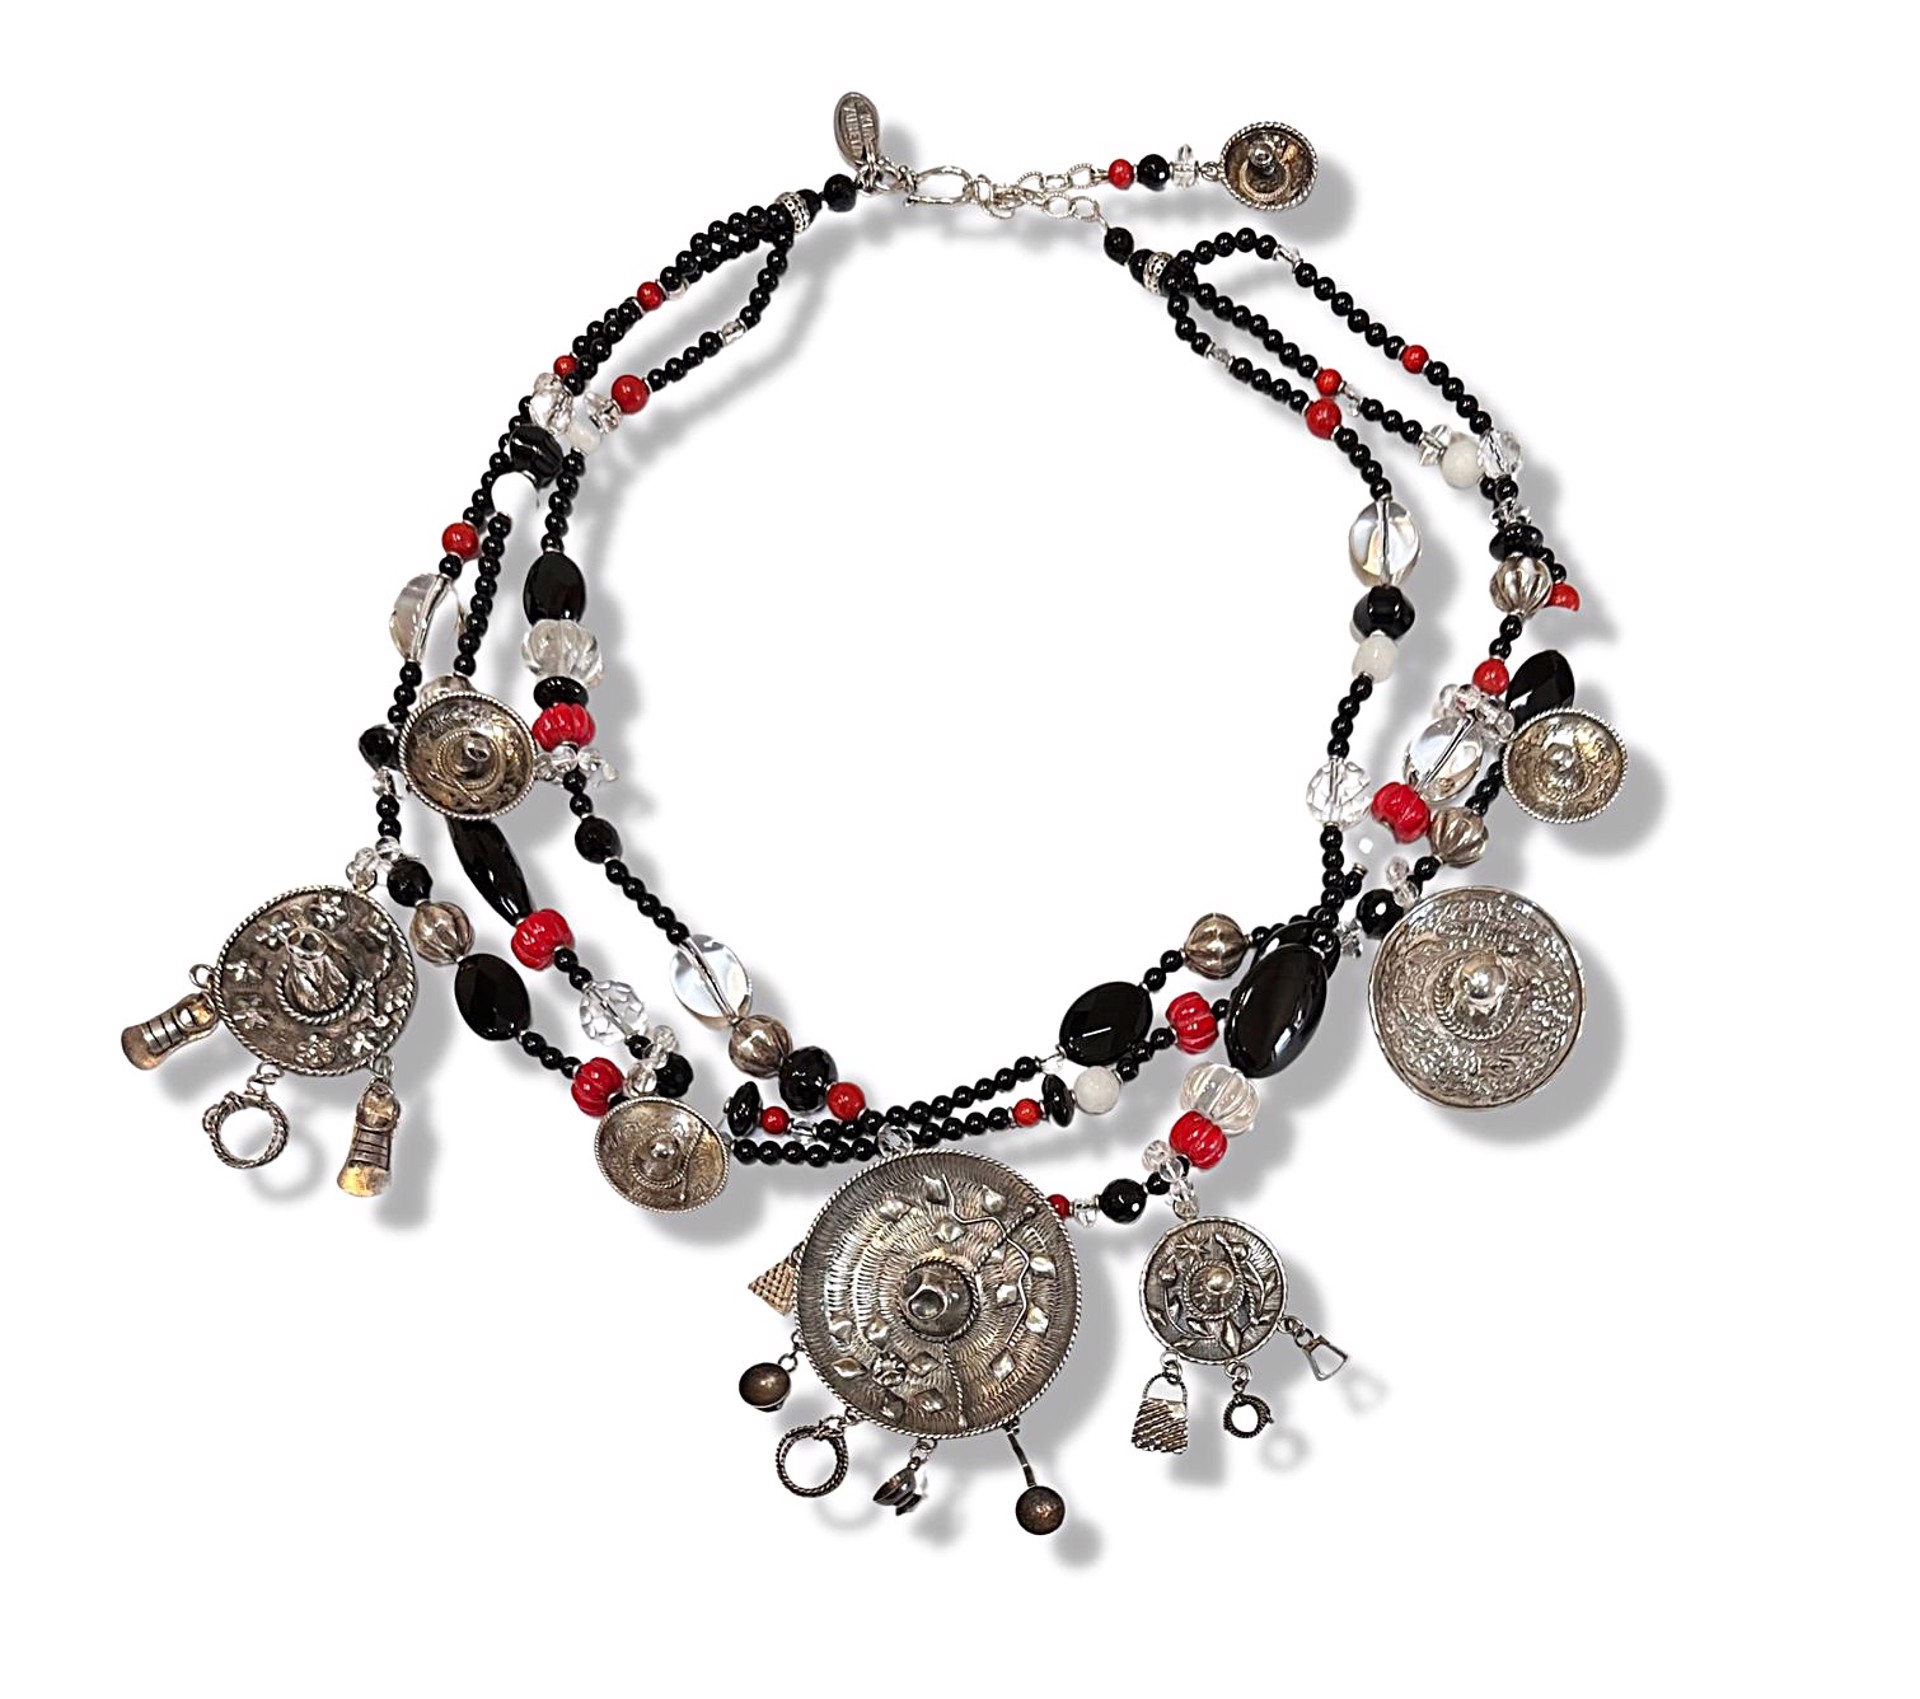 Necklace - 3 Strand Short Onyx and Crystal Coral Vintage Mexican Sombreros #103 by Kim Yubeta